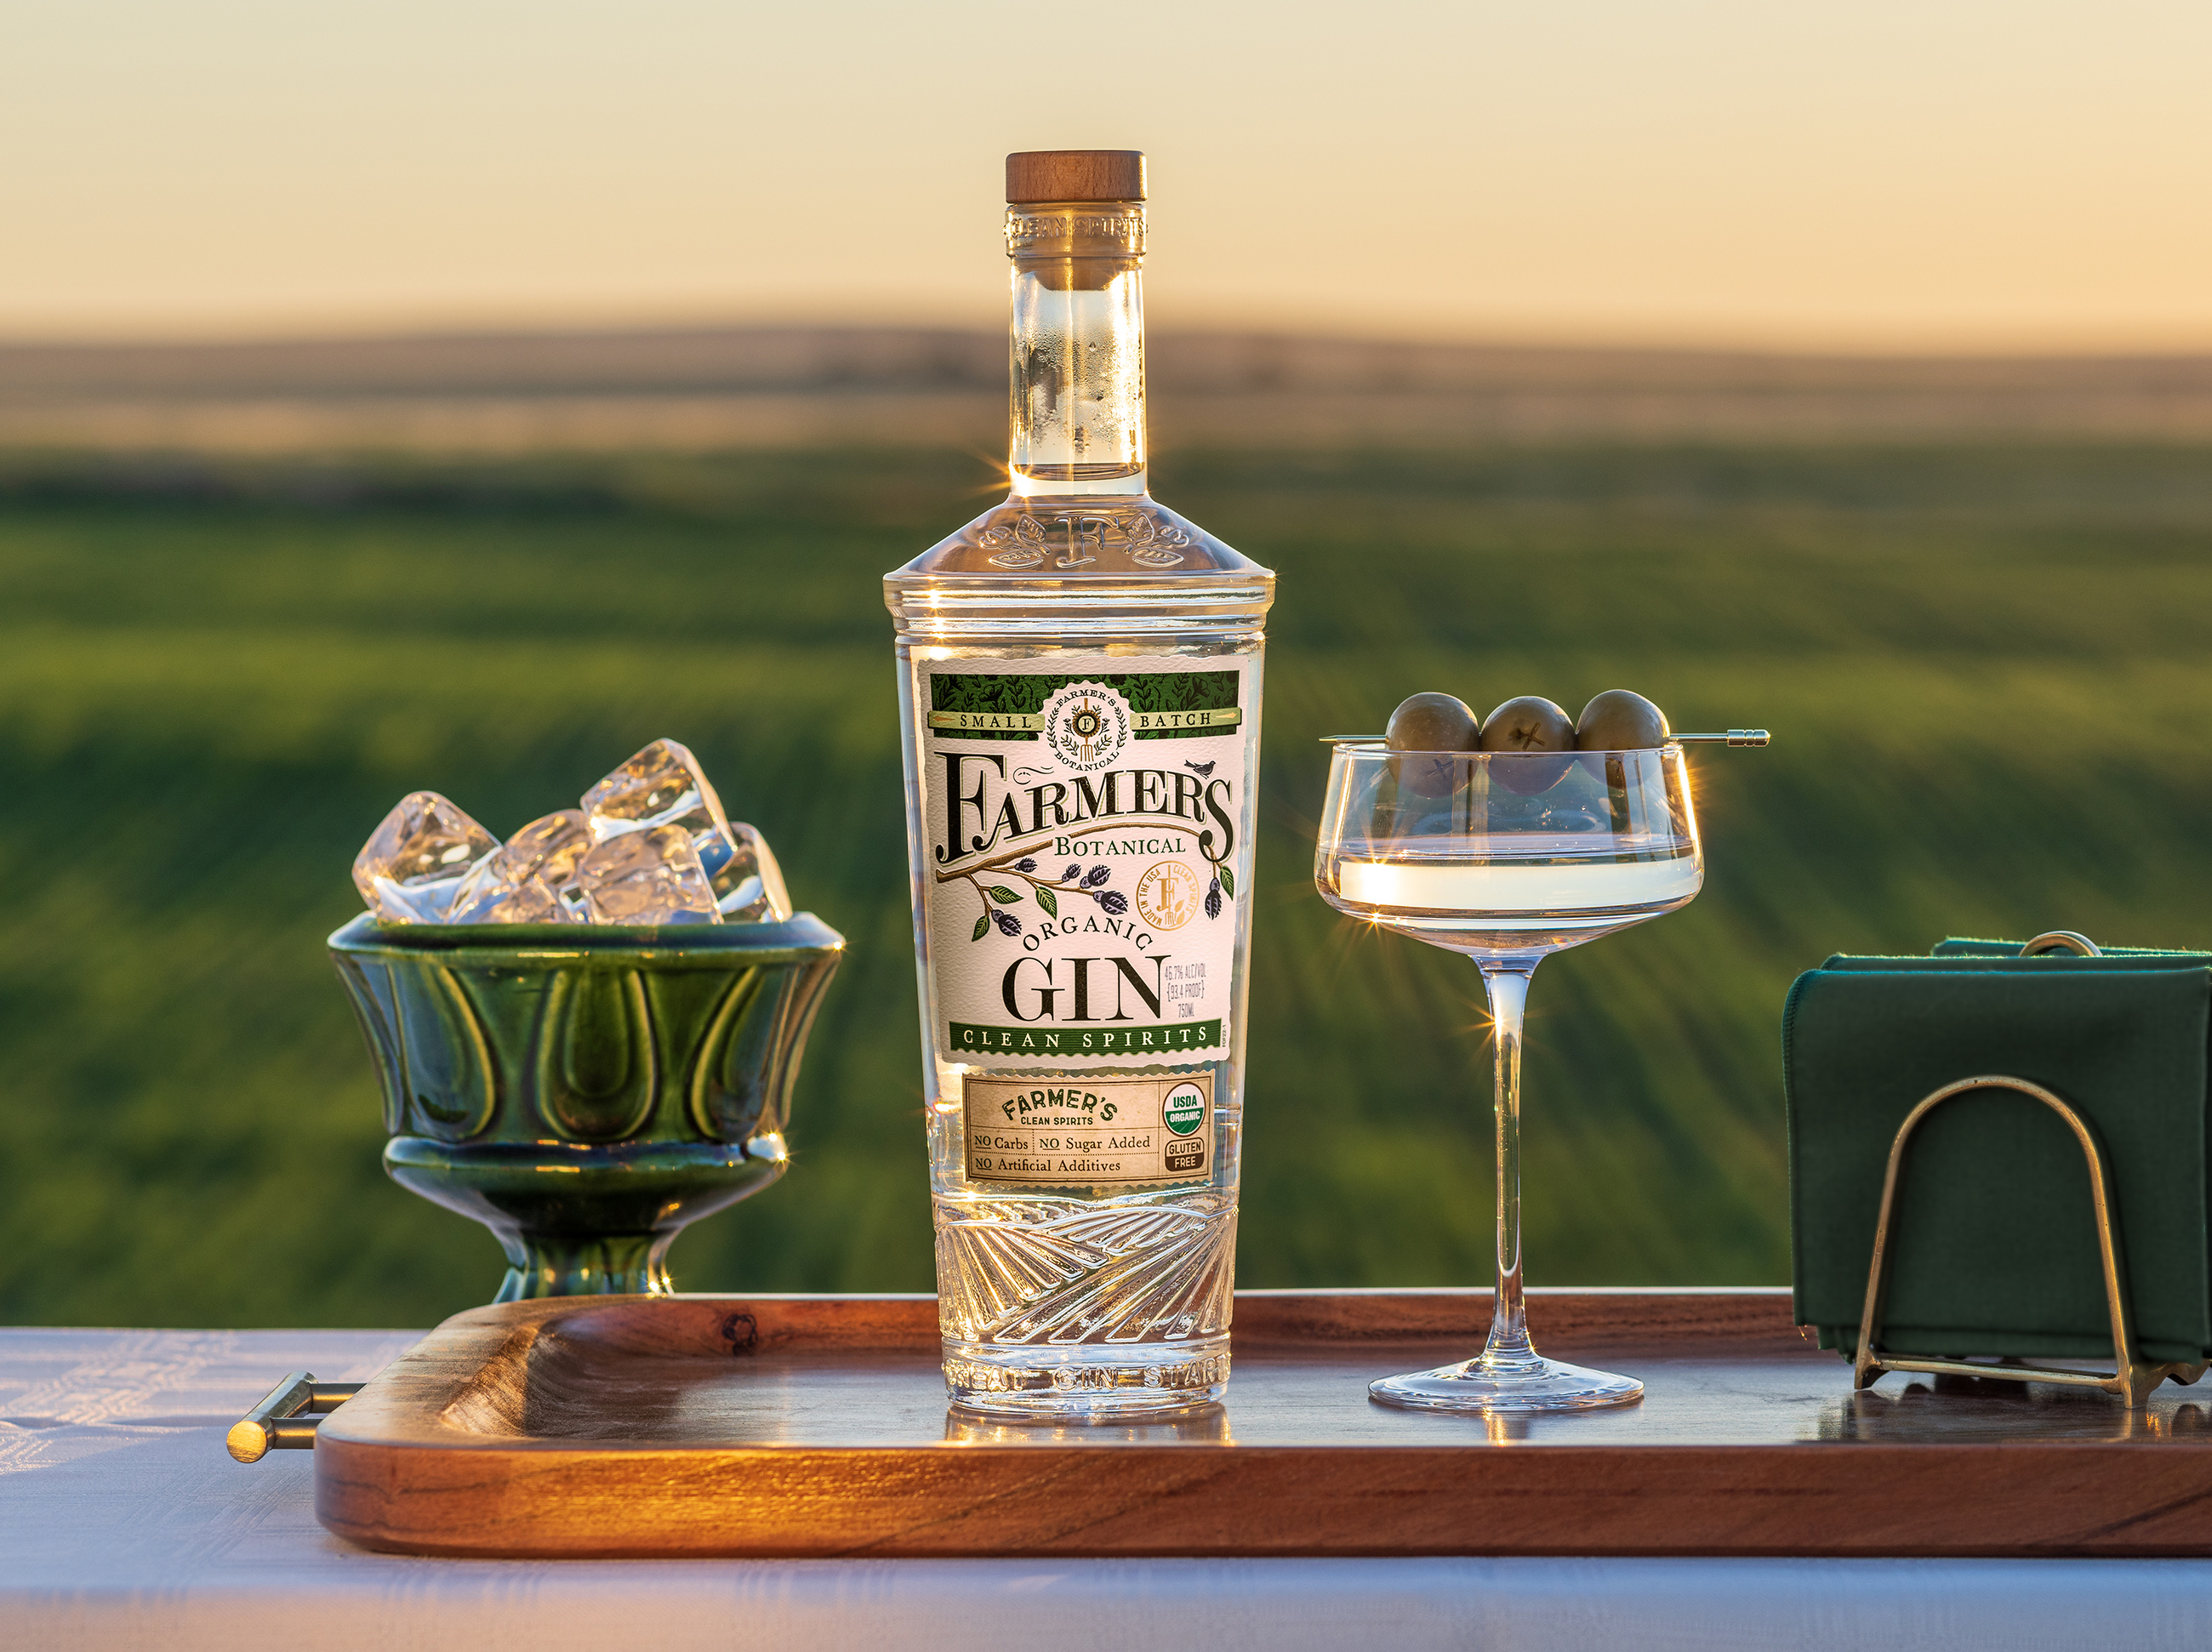 Farmer's Organic Gin makes an impeccable martini, a classic cocktail that's seen a huge resurgence.